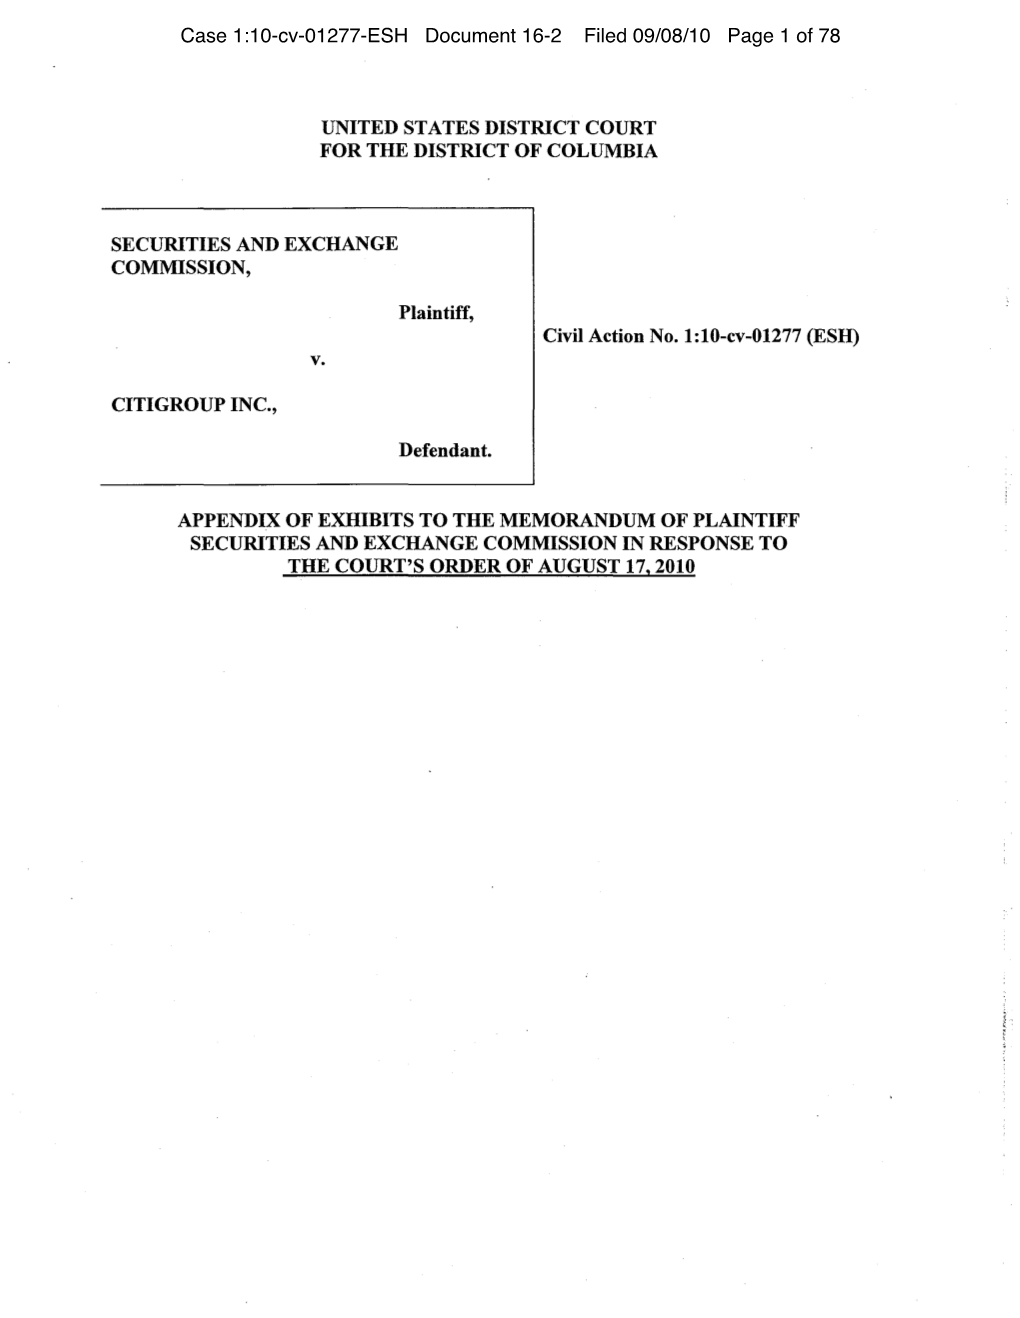 Case 1:10-Cv-01277-ESH Document 16-2 Filed 09/08/10 Page 1 of 78